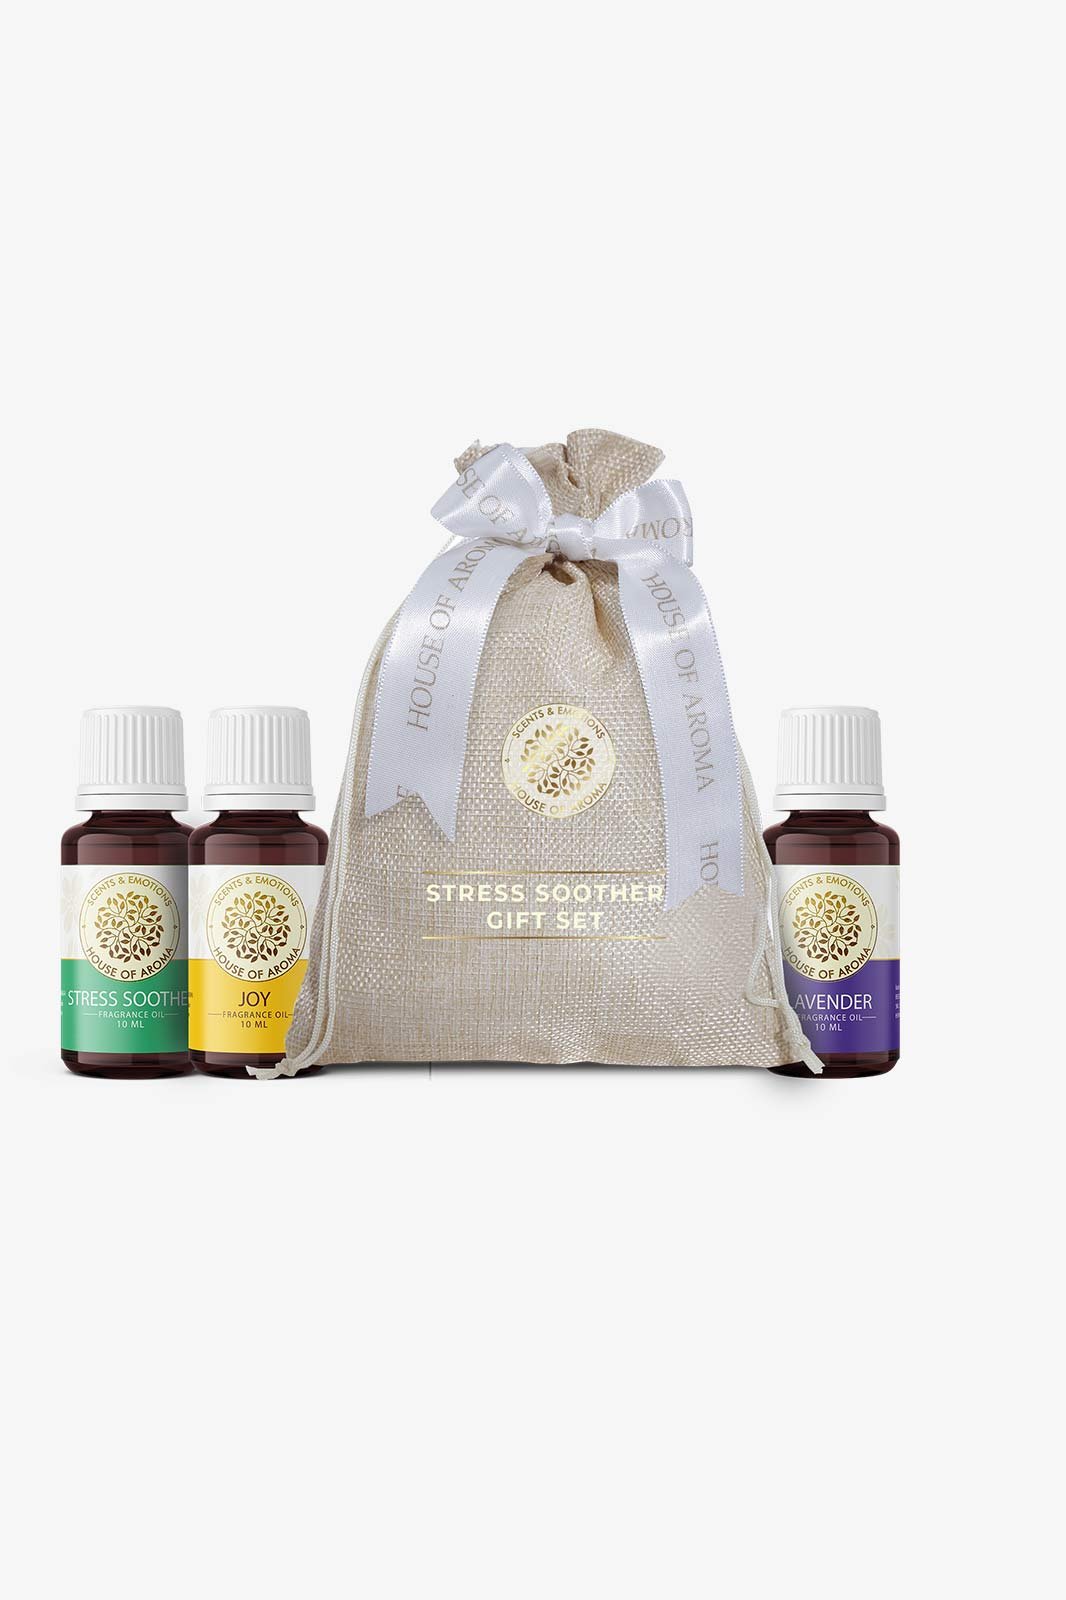 stress soother diwali gift set, Stress Soother Fragrance Oil, Joy Fragrance Oil, Lavender Fragrance Oil, Diwali gift pack online, Diwali hamper items